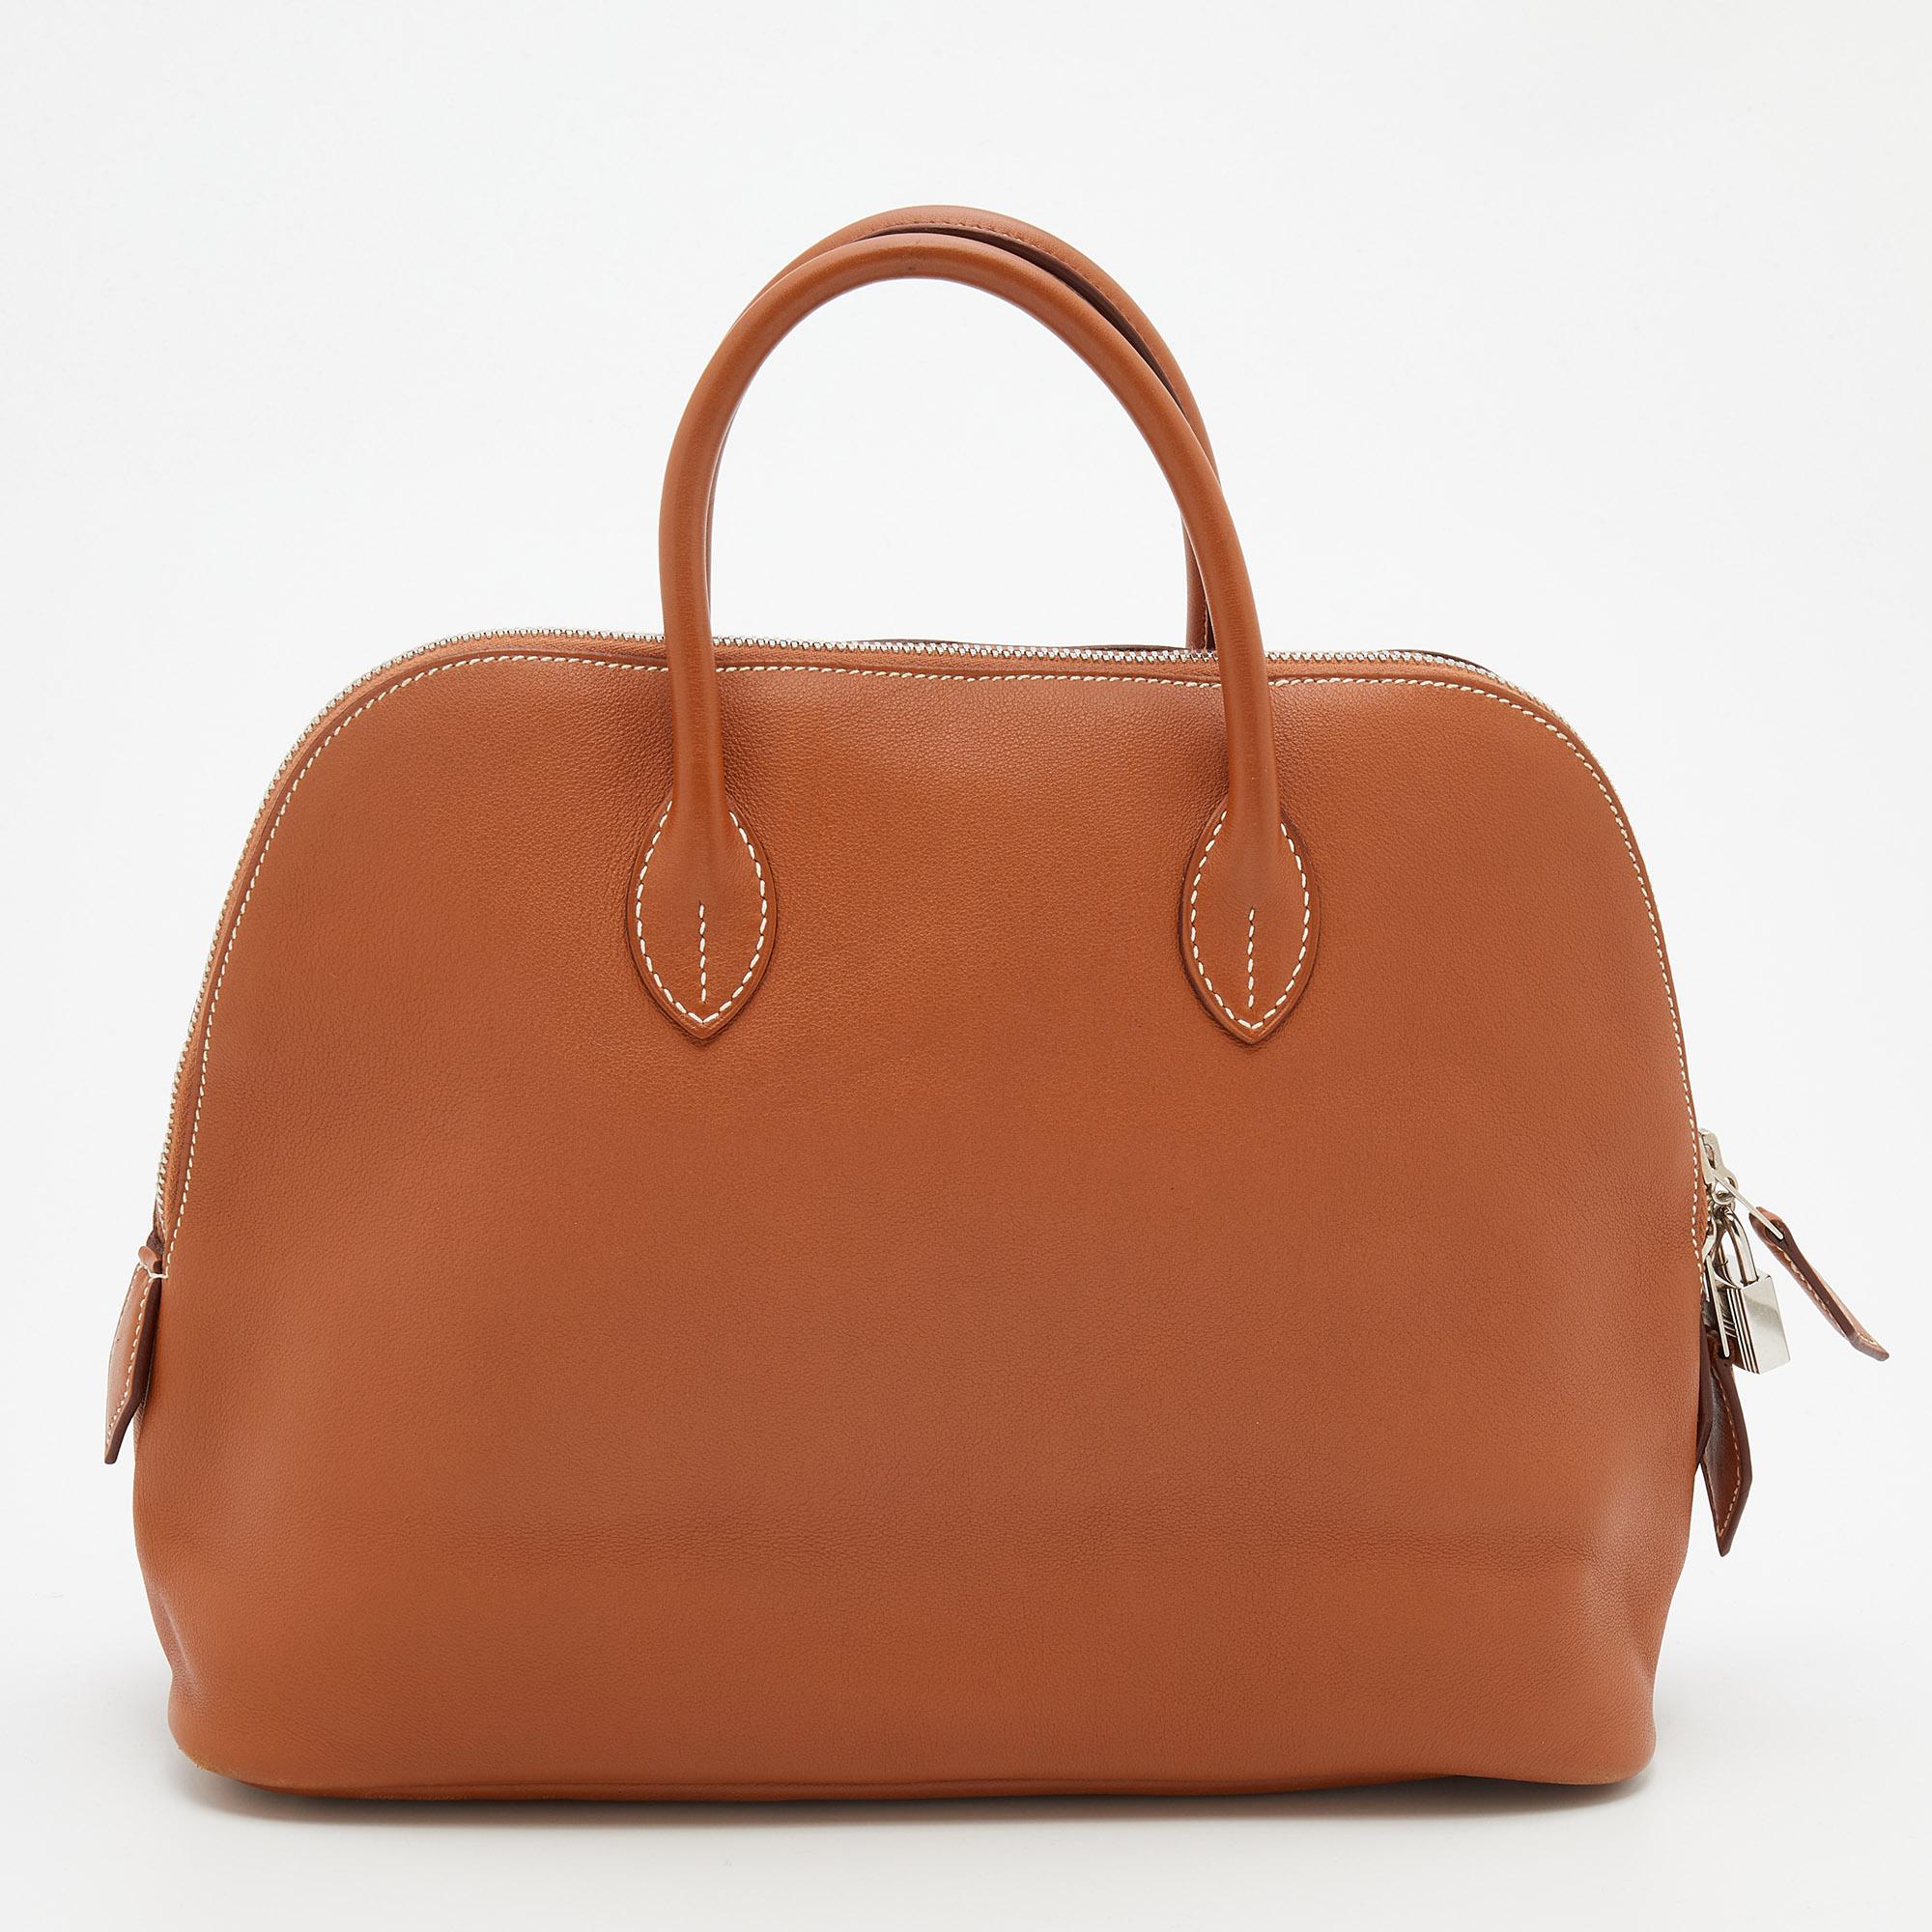 Luxuriously crafted by the experts at Hermès, this stunning Bolide 1923 bag is a must-have accessory for fashion lovers. An apt everyday wear bag, it is the perfect combination of sophistication and practicality. Crafted from Swift leather, this bag